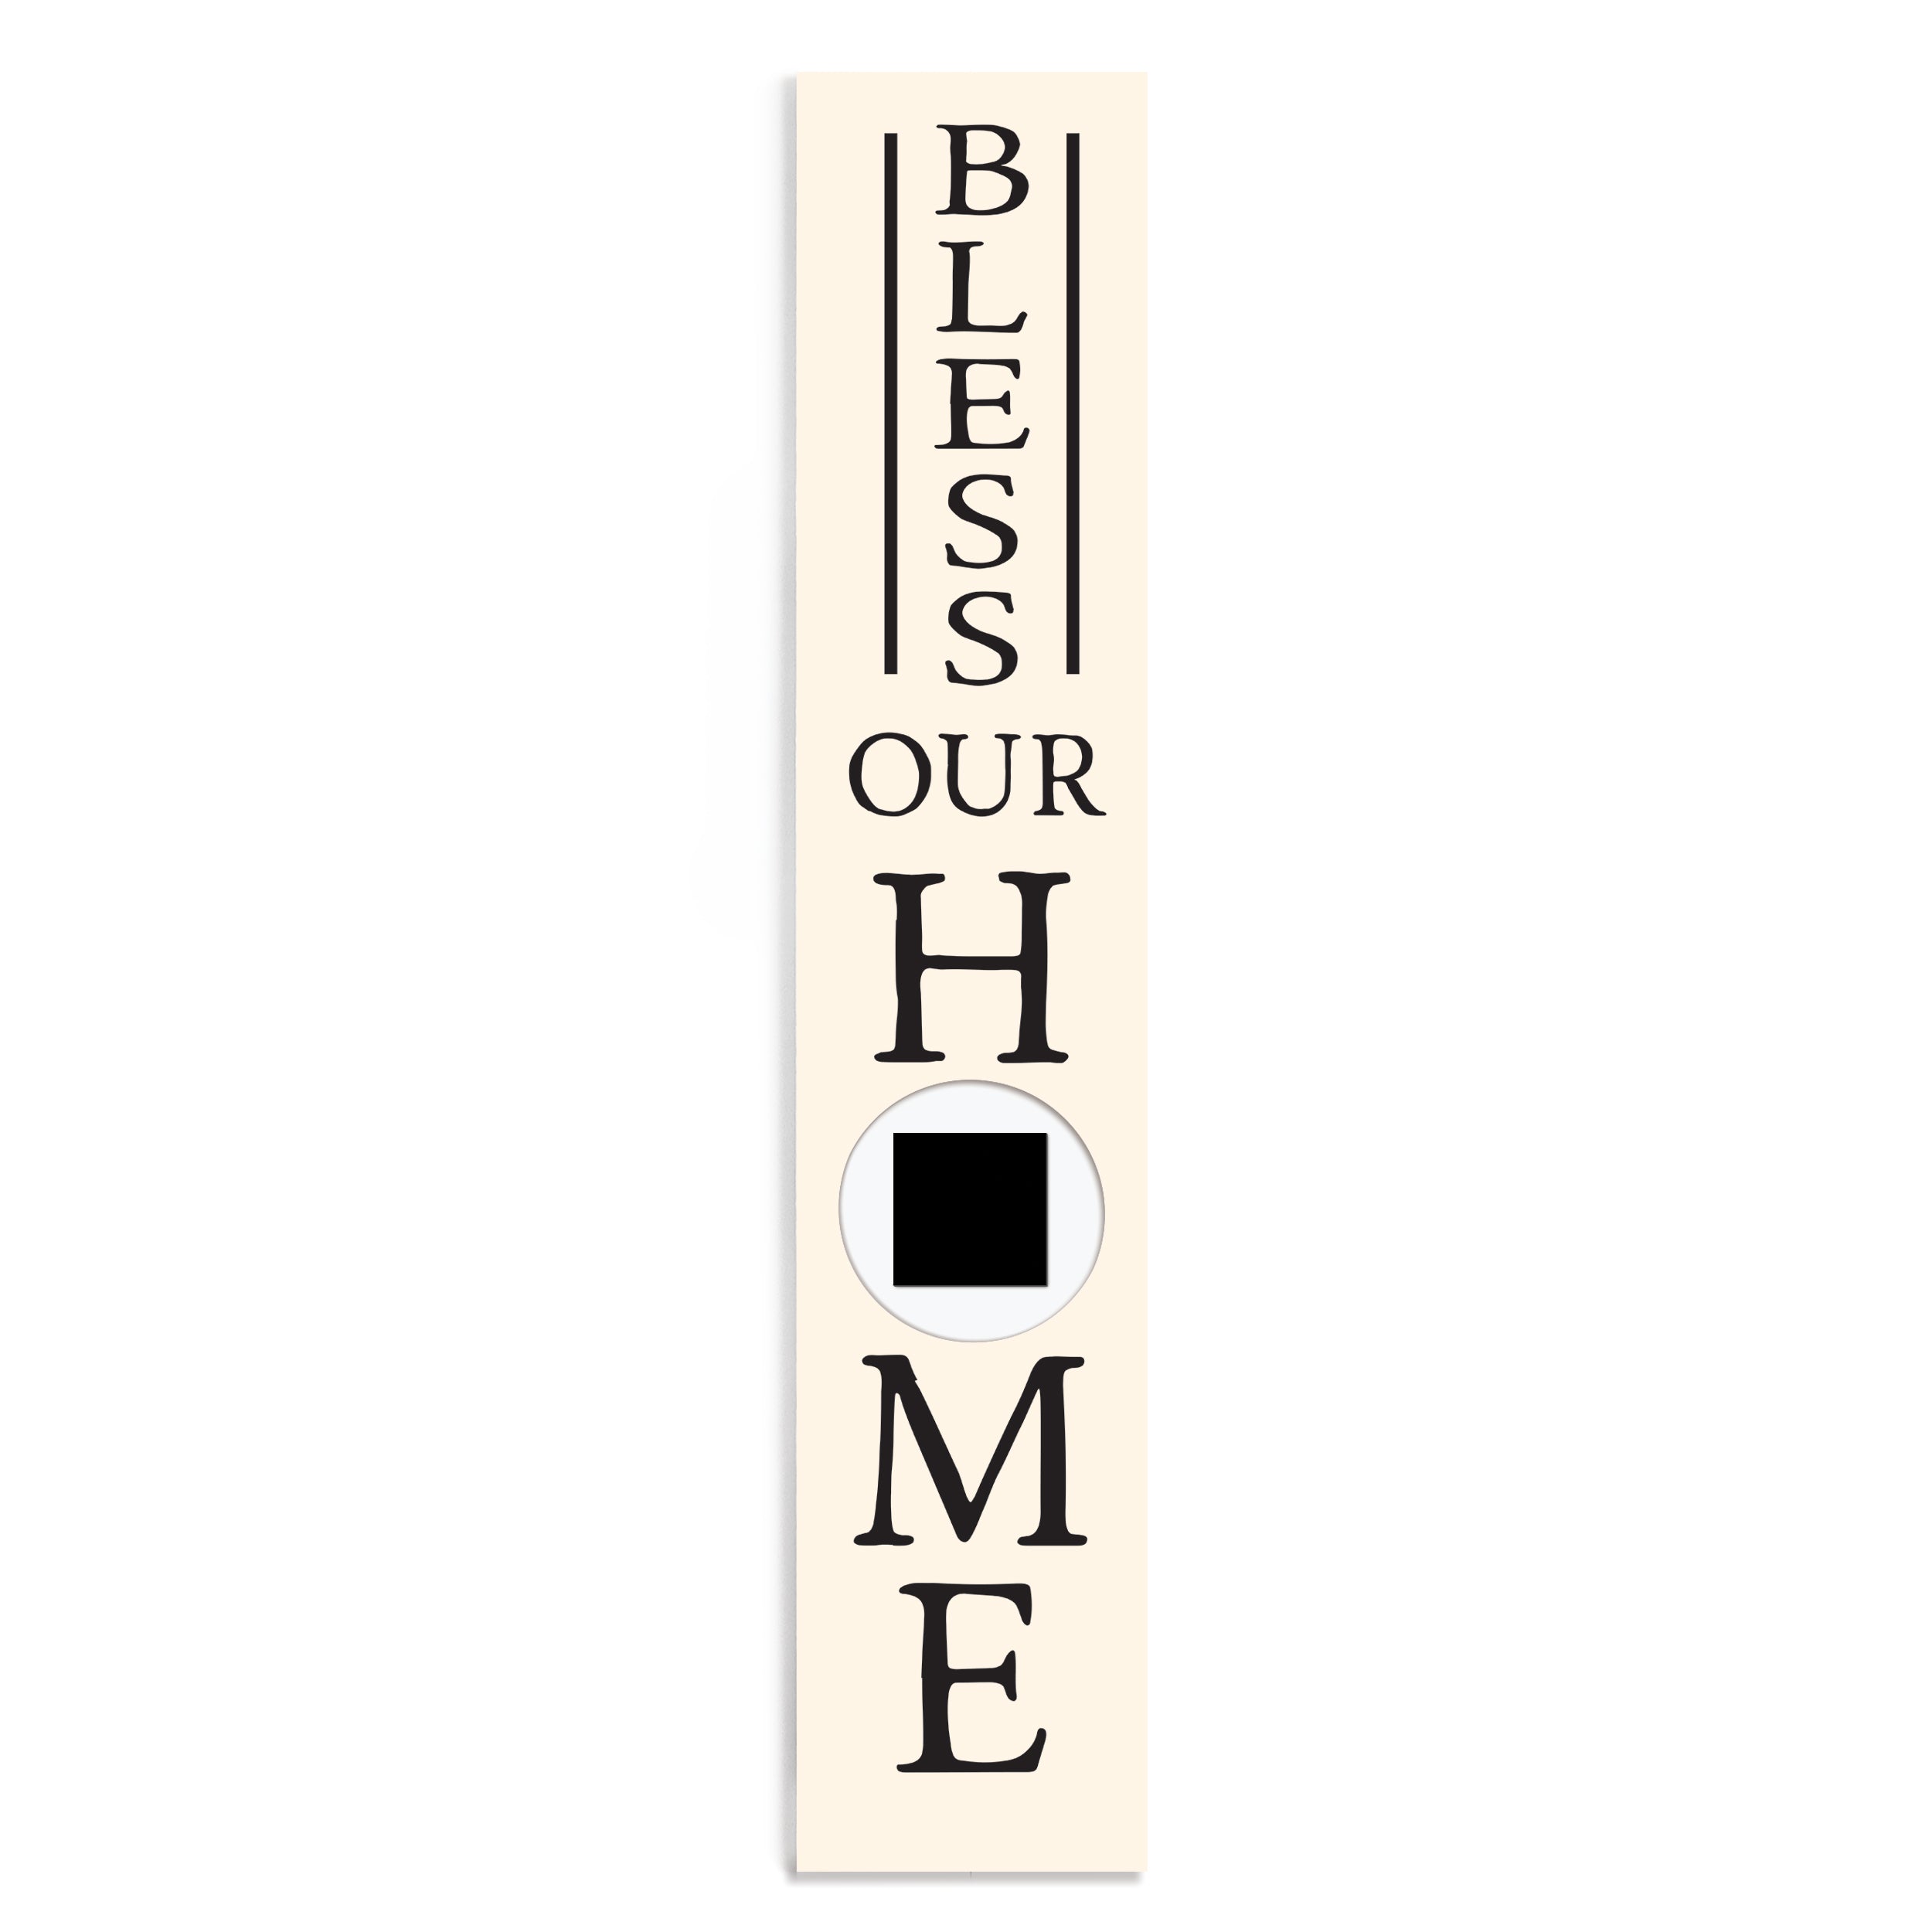 Bless Our Home Switcheroo Sign